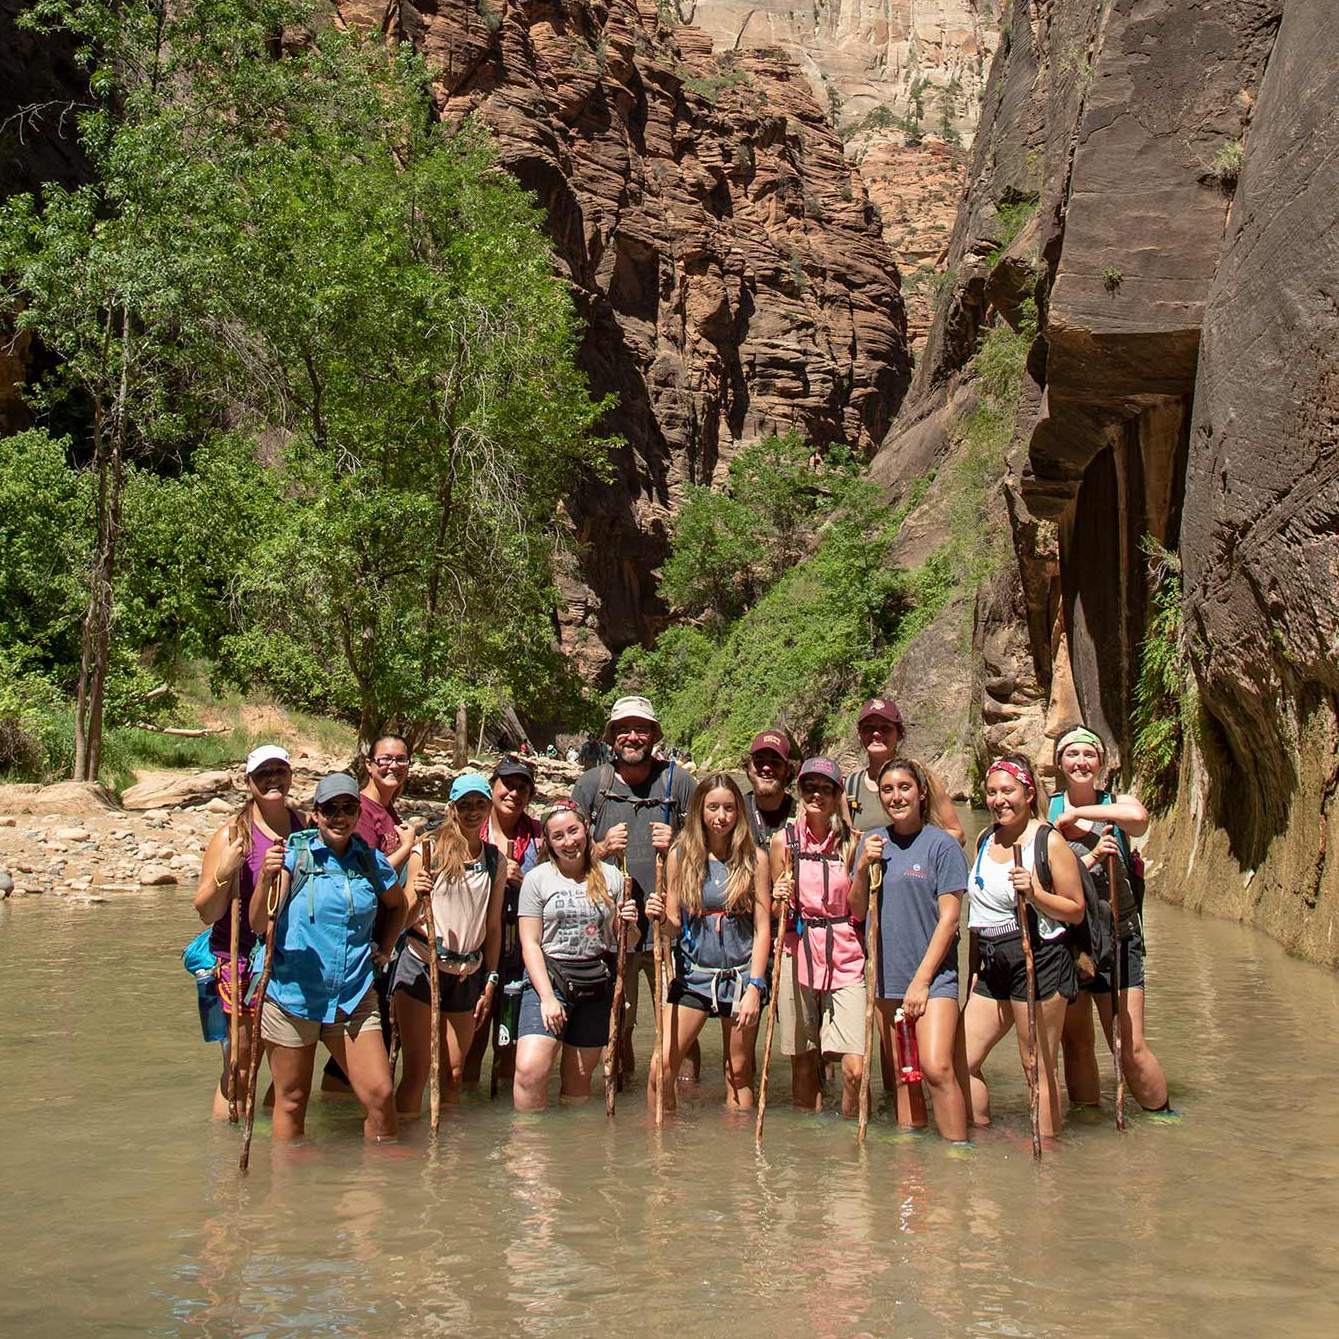 A class full of students and their professor pose in a shallow river